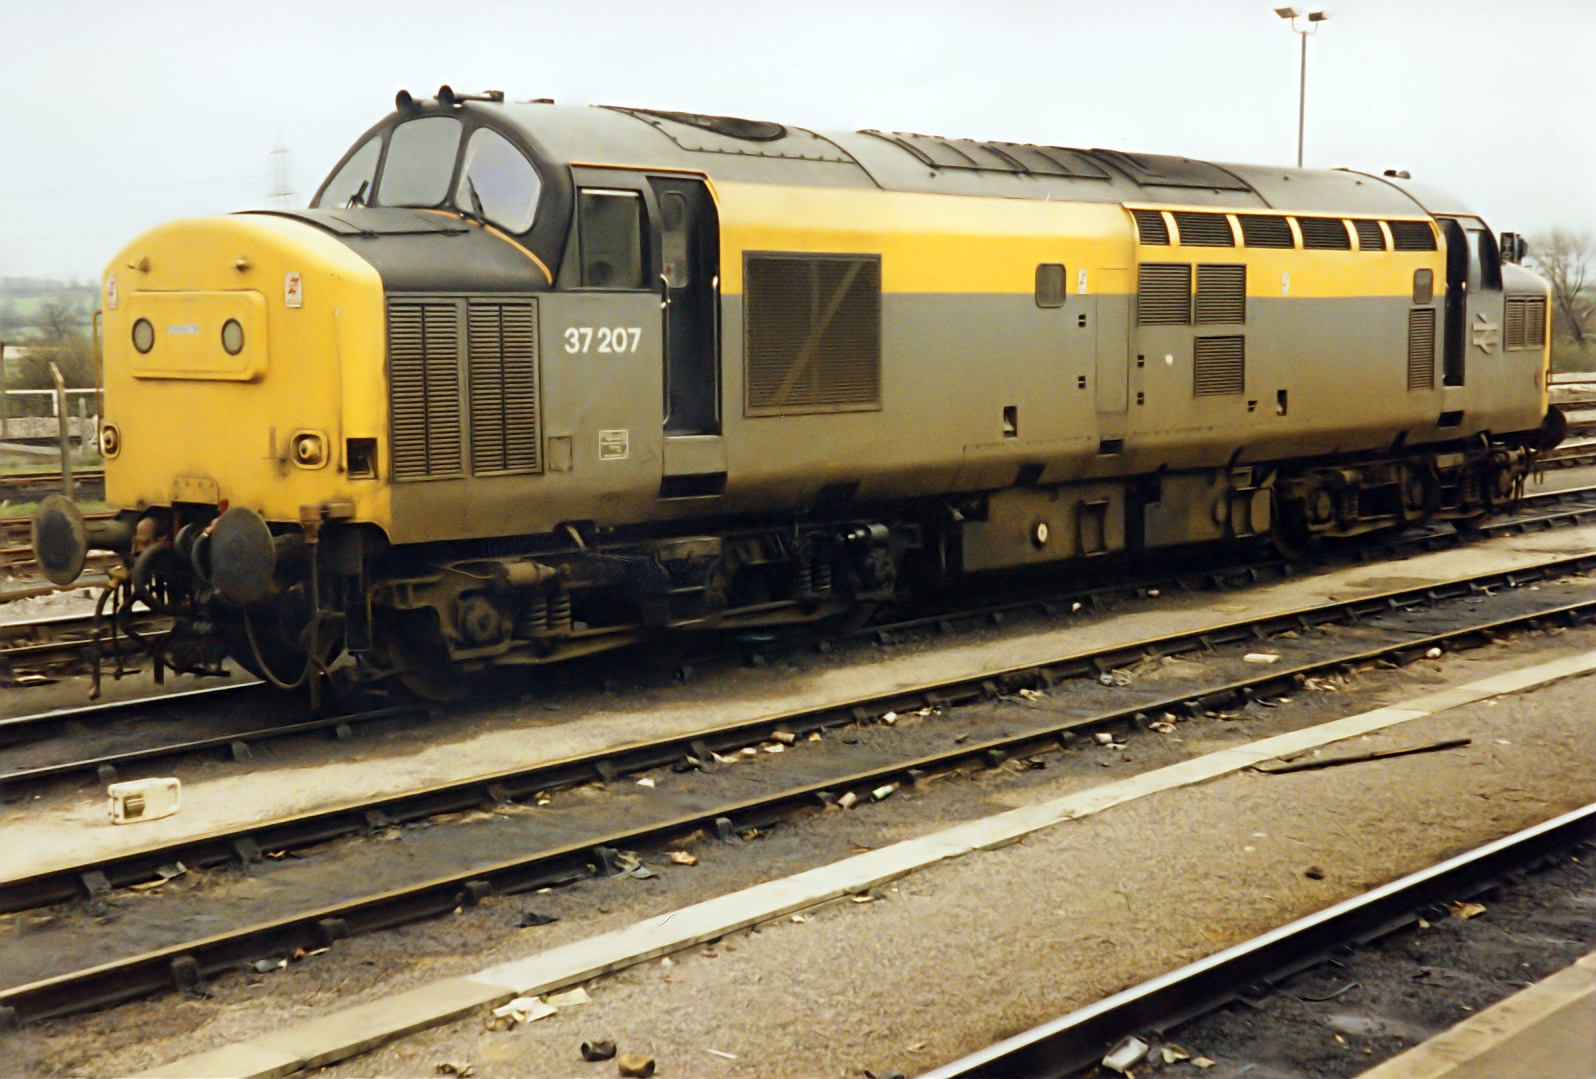 37207 in Dutch Yellow and Grey livery rests between duties at Didcot stabling point.